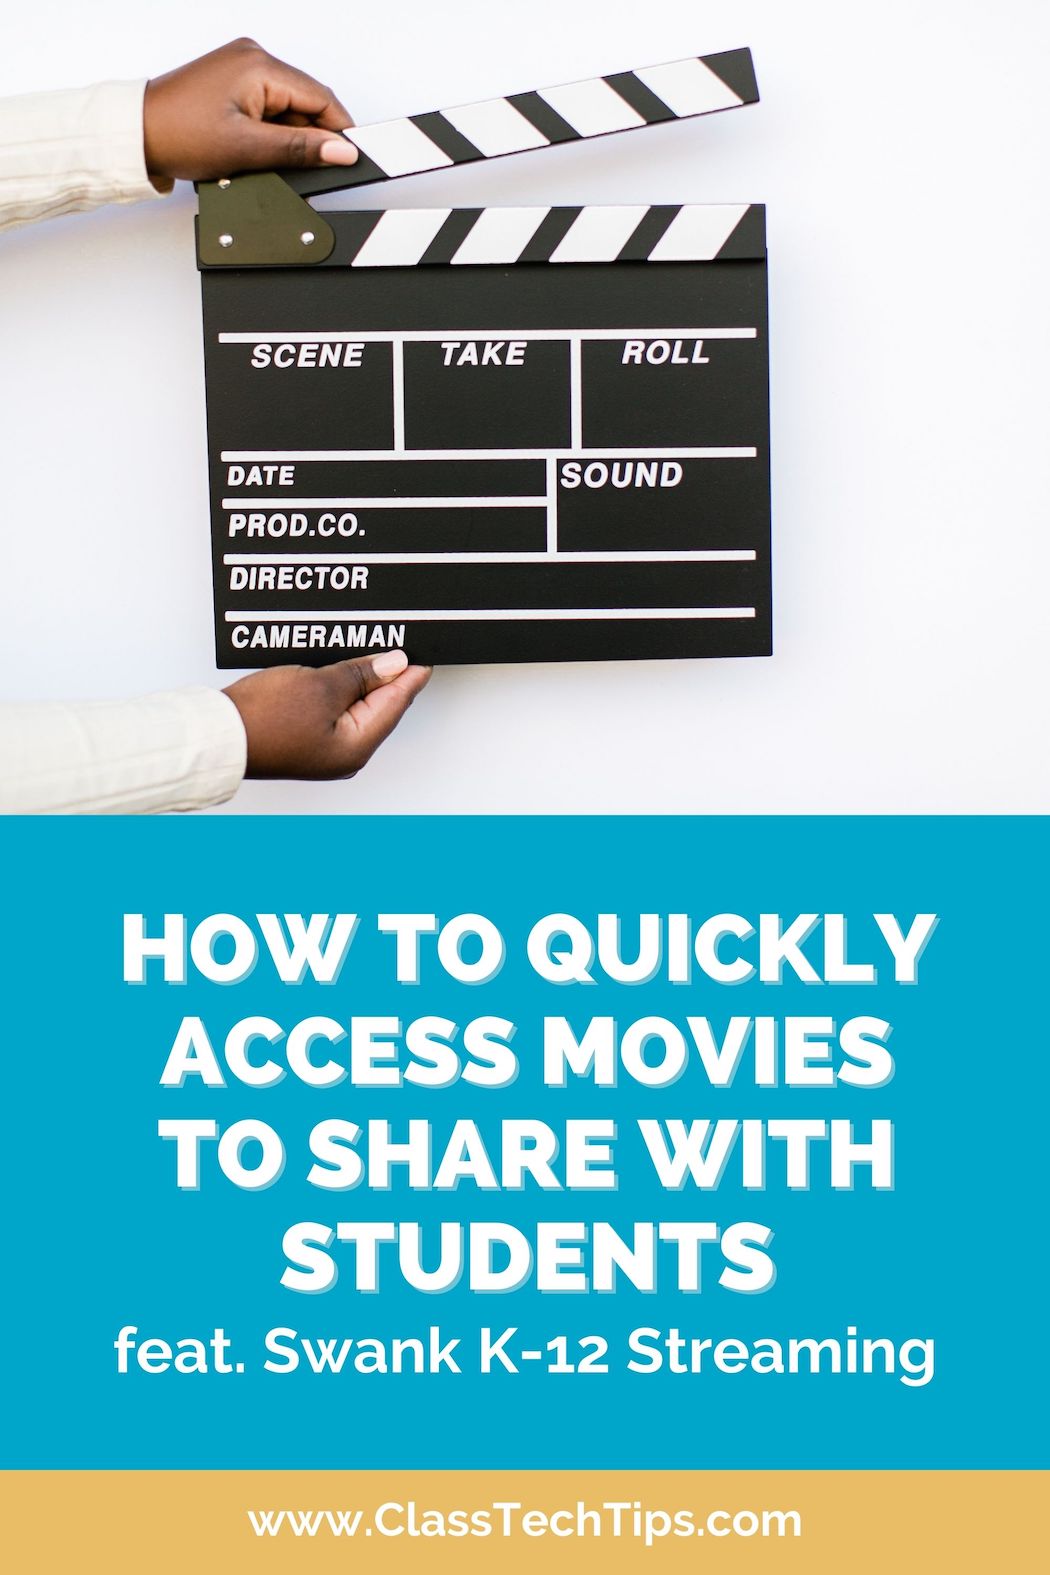 K-12 schools and districts can quickly access movies to share with students with a platform designed with educators in mind.